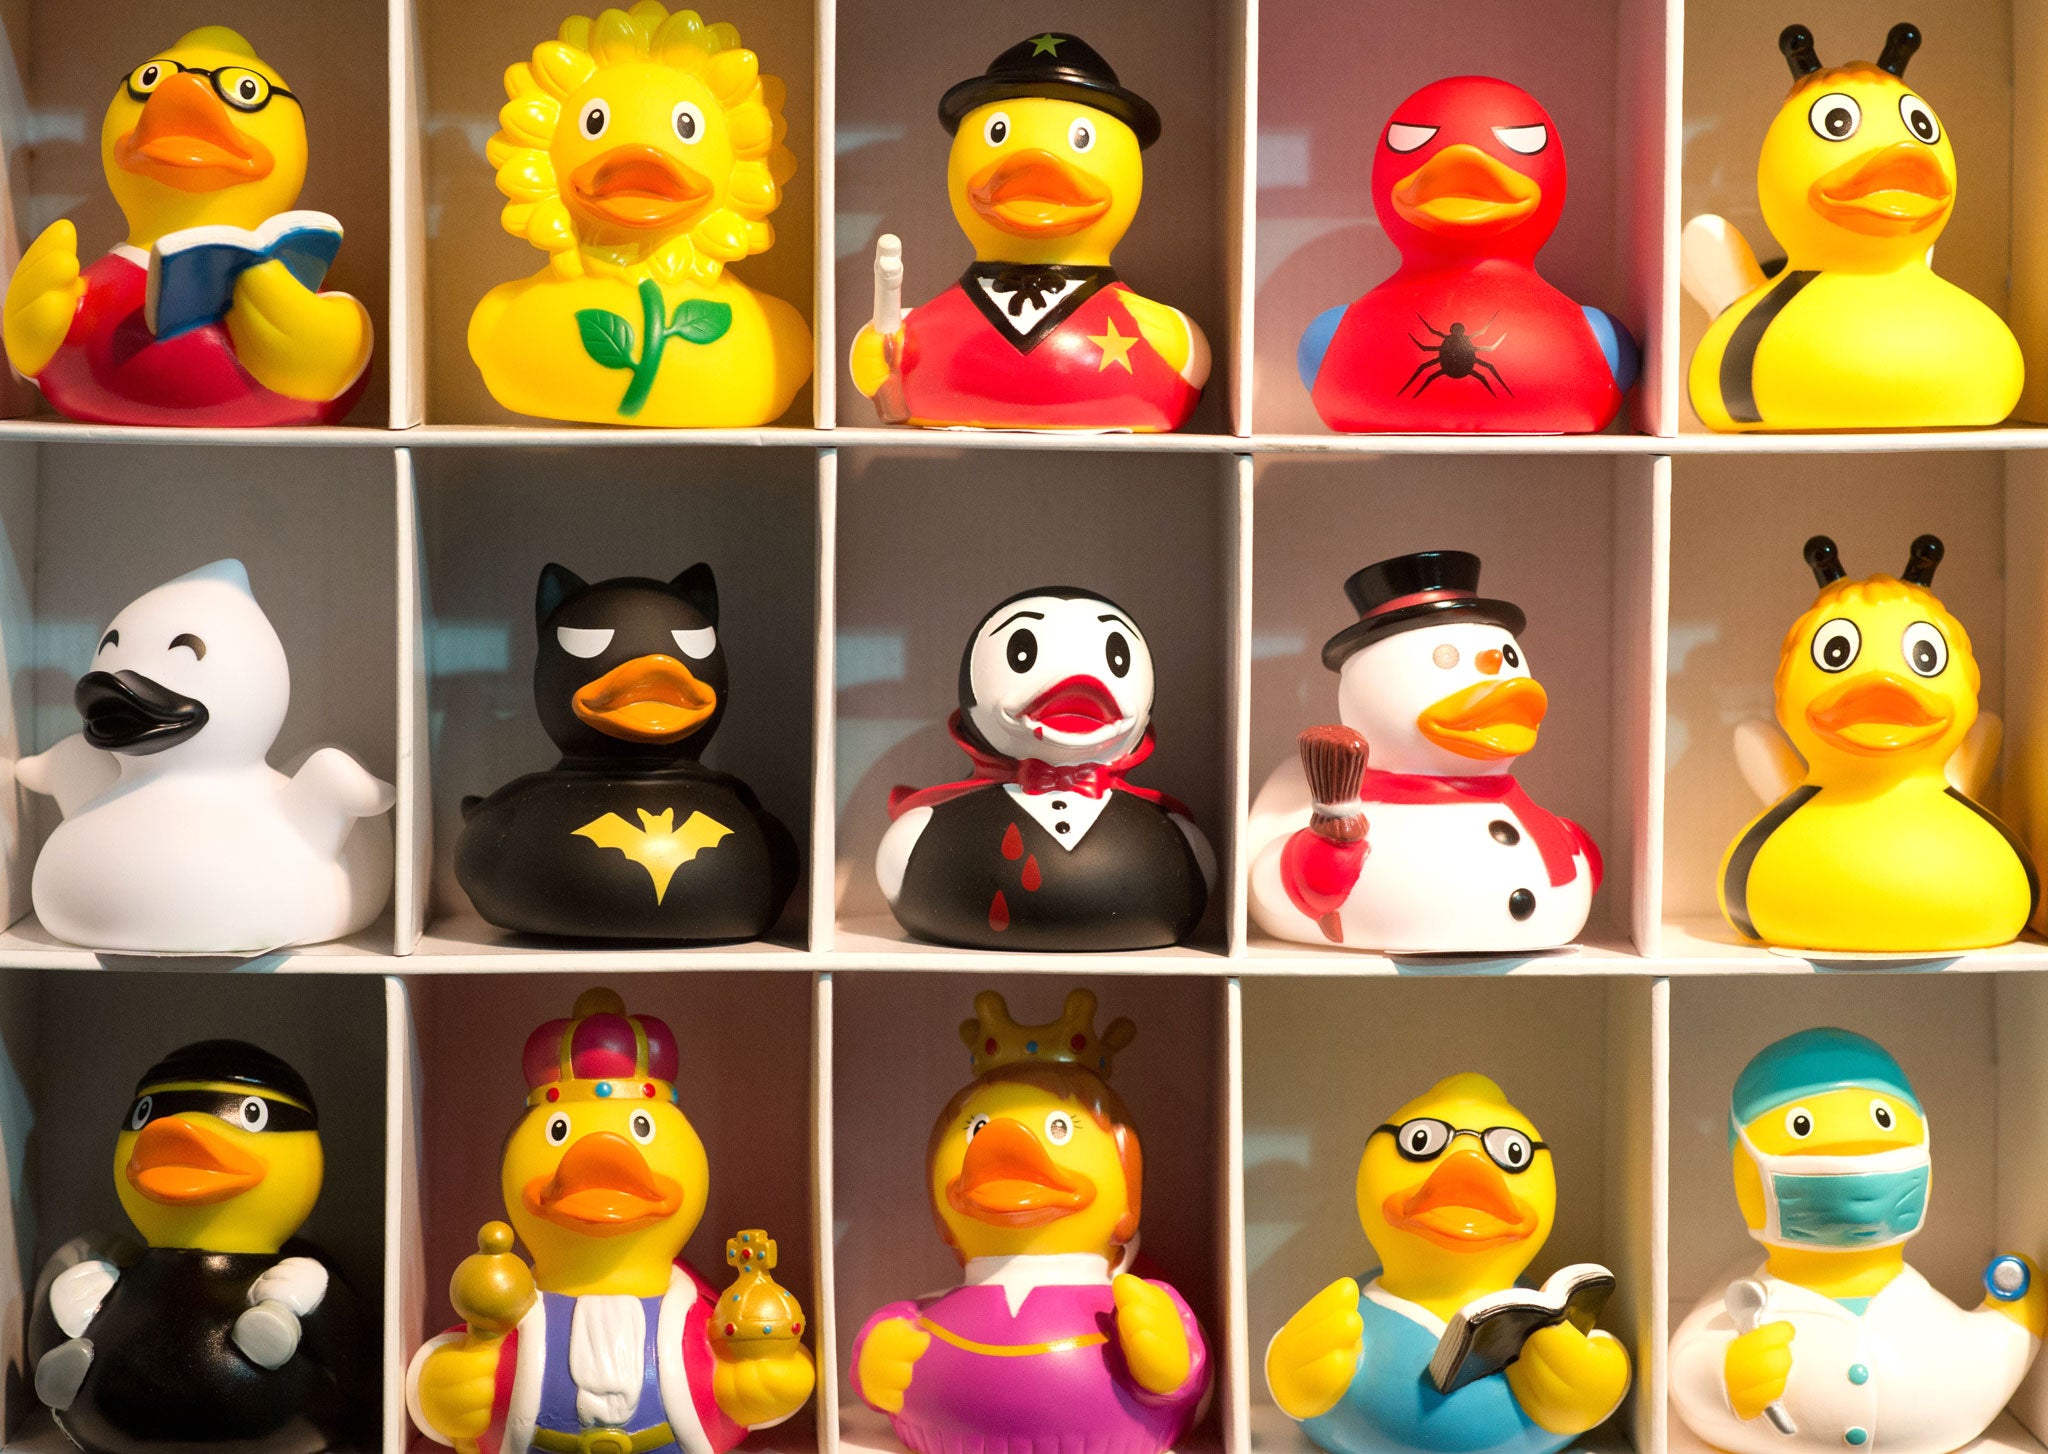 Plastic bath ducks are pictured at the Nuremberg International Toy Fair in Nuremberg, which is the world's biggest trade fair for toys